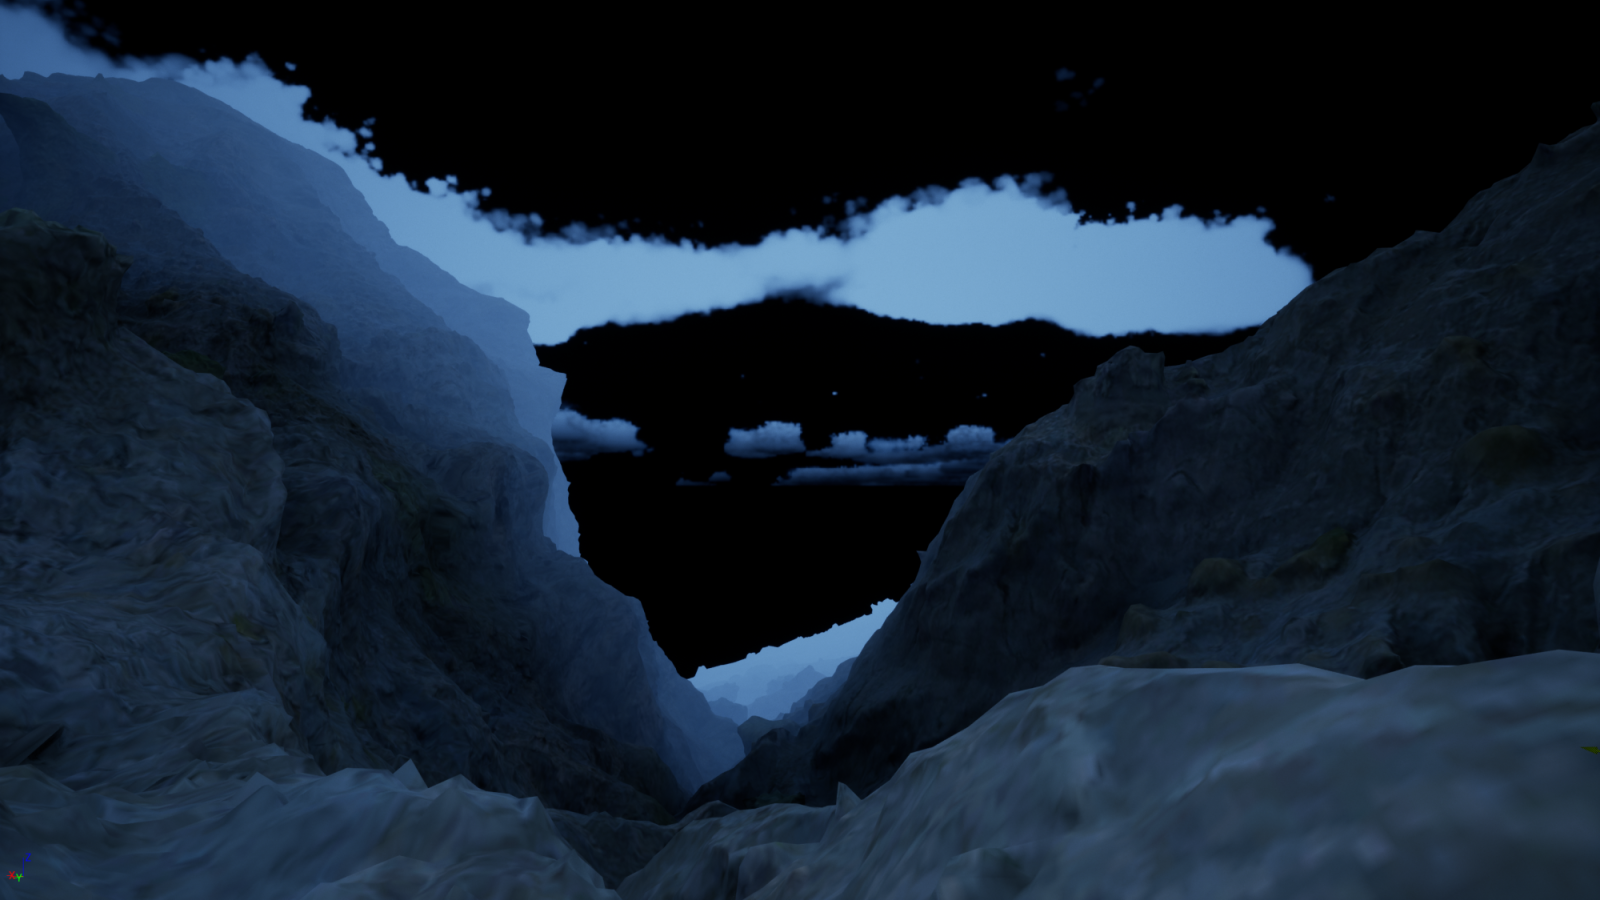 beautiful, immersive nature-themed environment featuring a snowy landscape with steep cliffs covered in ice